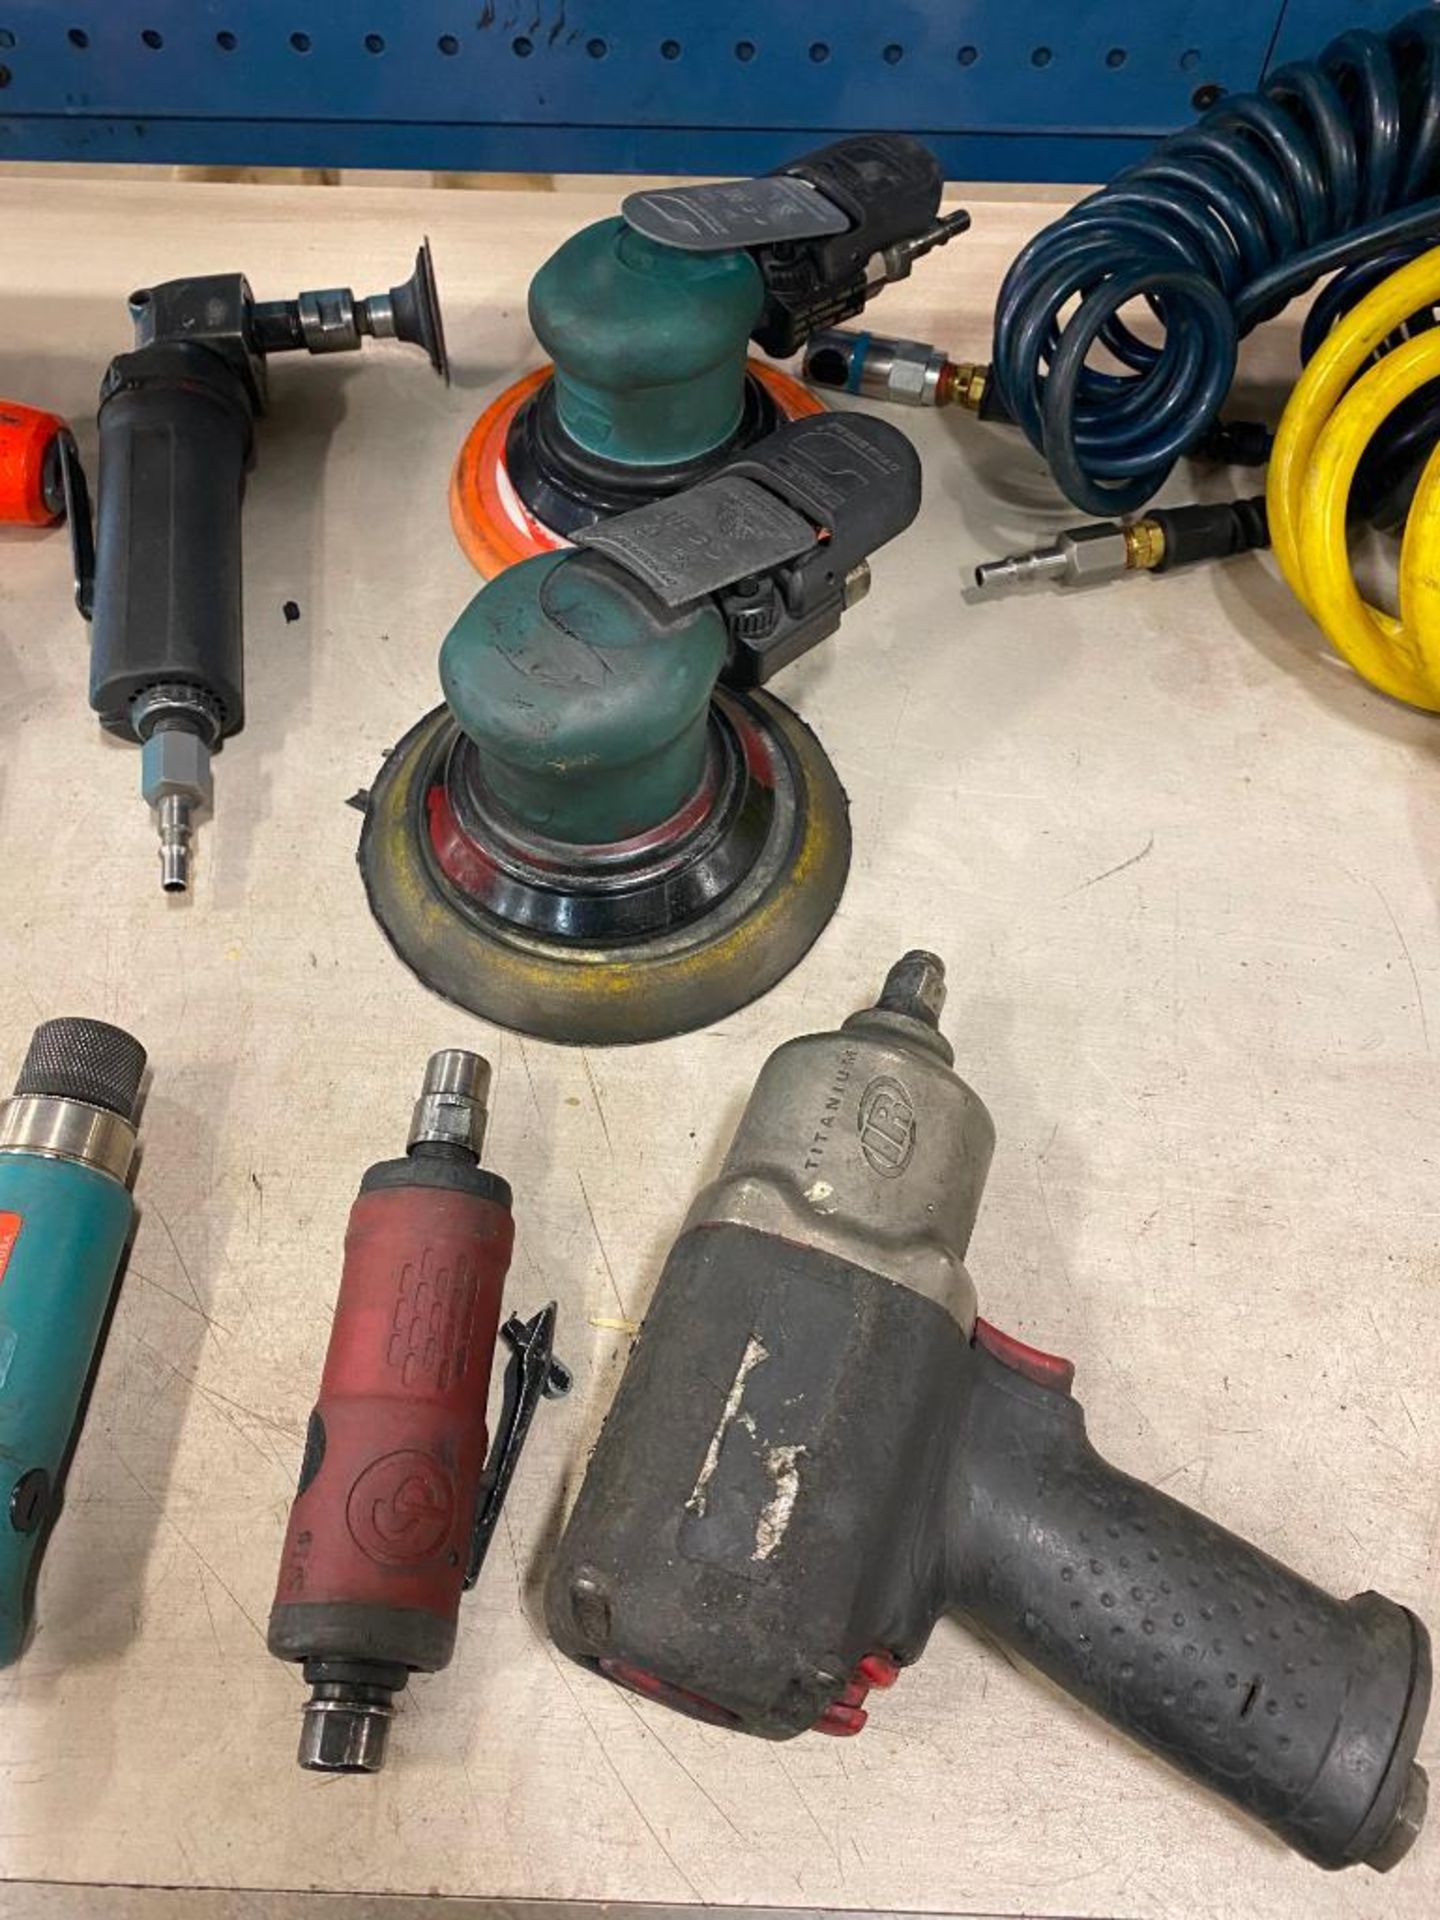 ASSORTED PNEUMATIC TOOLS INCL. DIE GRINDERS, RACHETS , PALM SANDERS, IMPACTS - Image 3 of 4